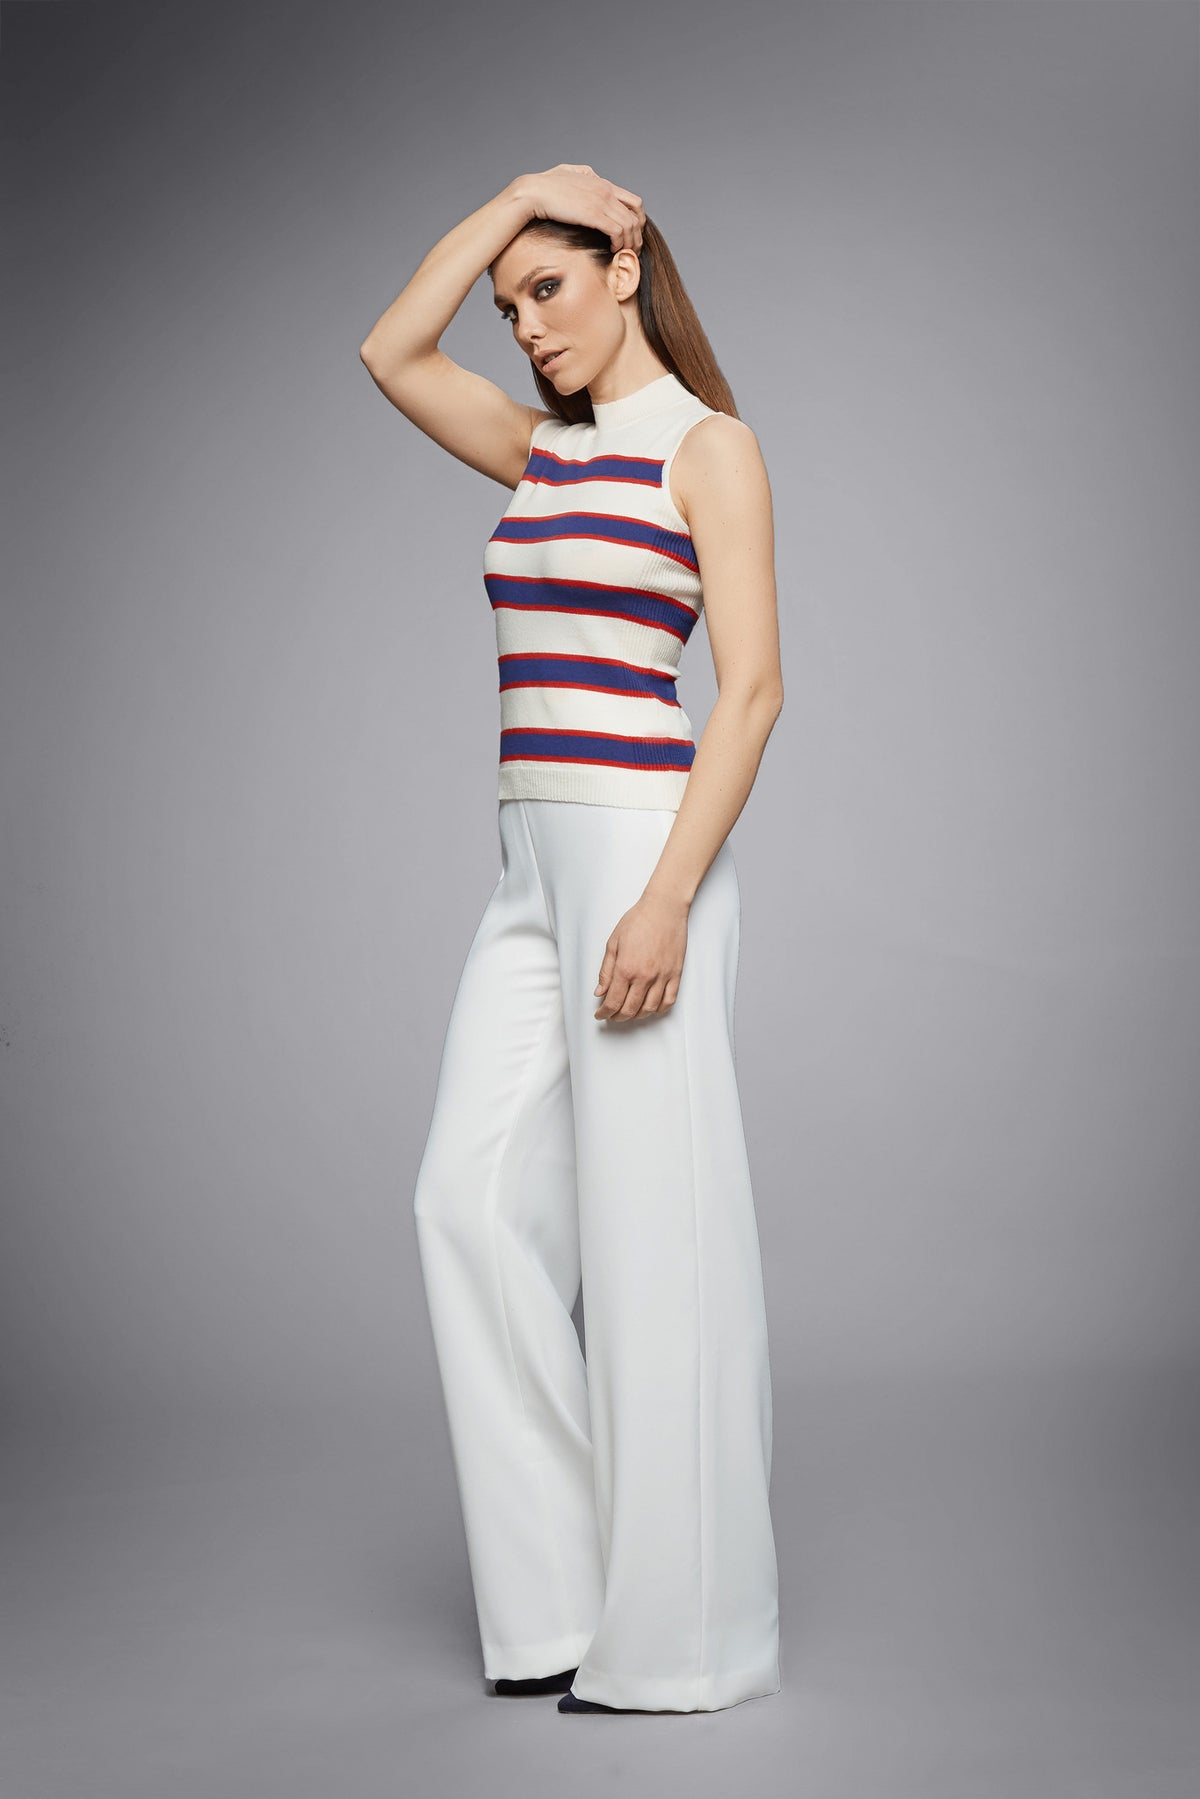 Blue And Red Striped Sleeveless Top